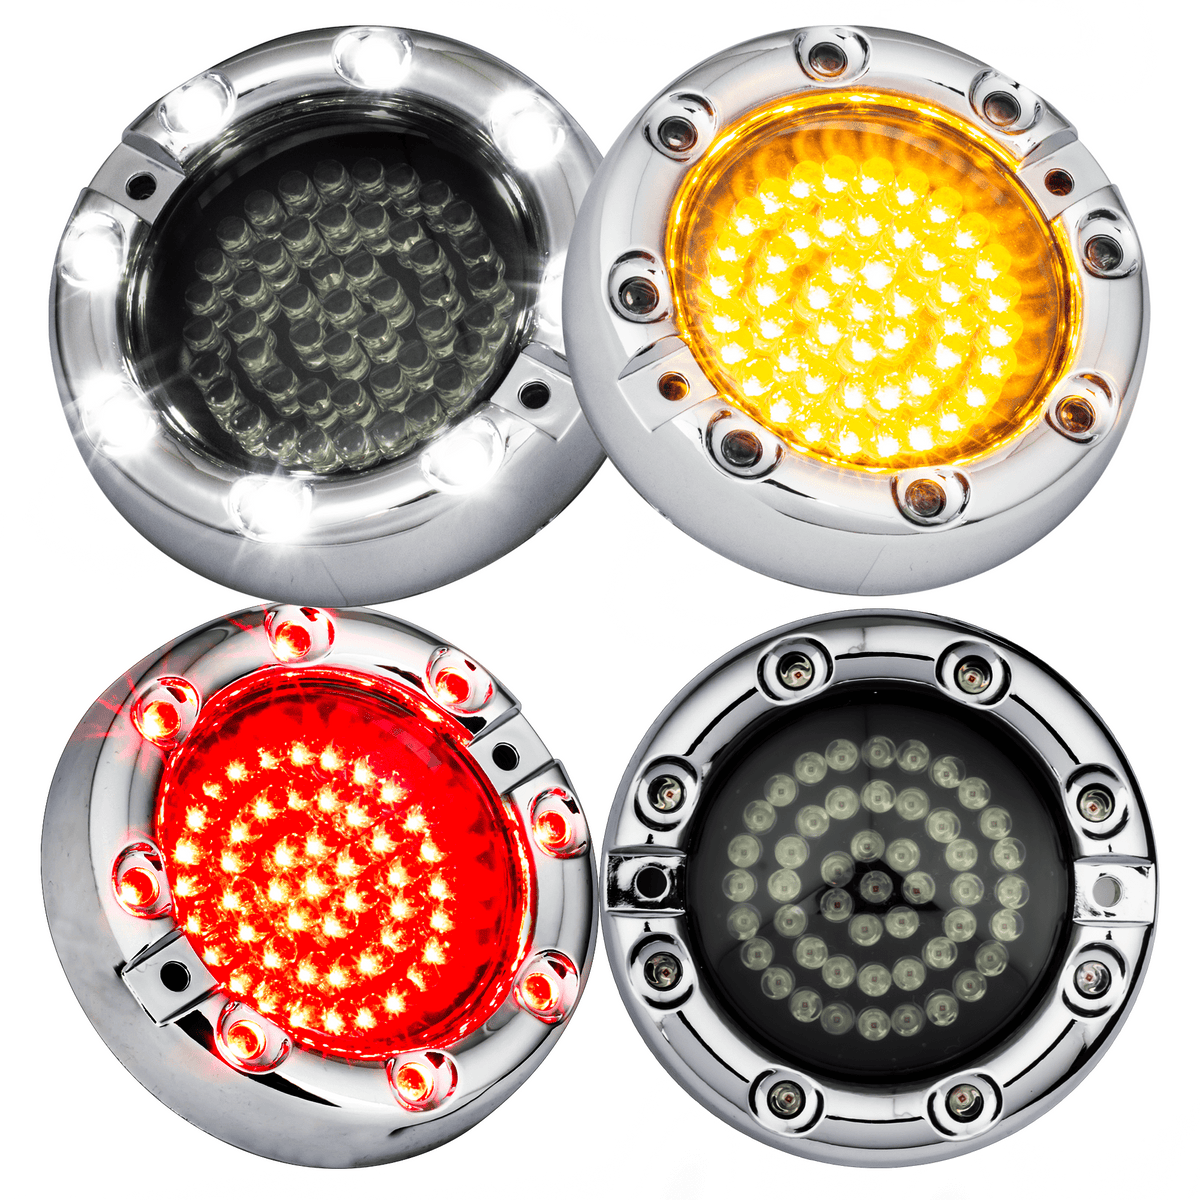 Eagle Lights 3 1/4” Infinity Beam Front and Rear LED Turn Signals with Running LED Light Ring for Harley Davidson Motorcycles